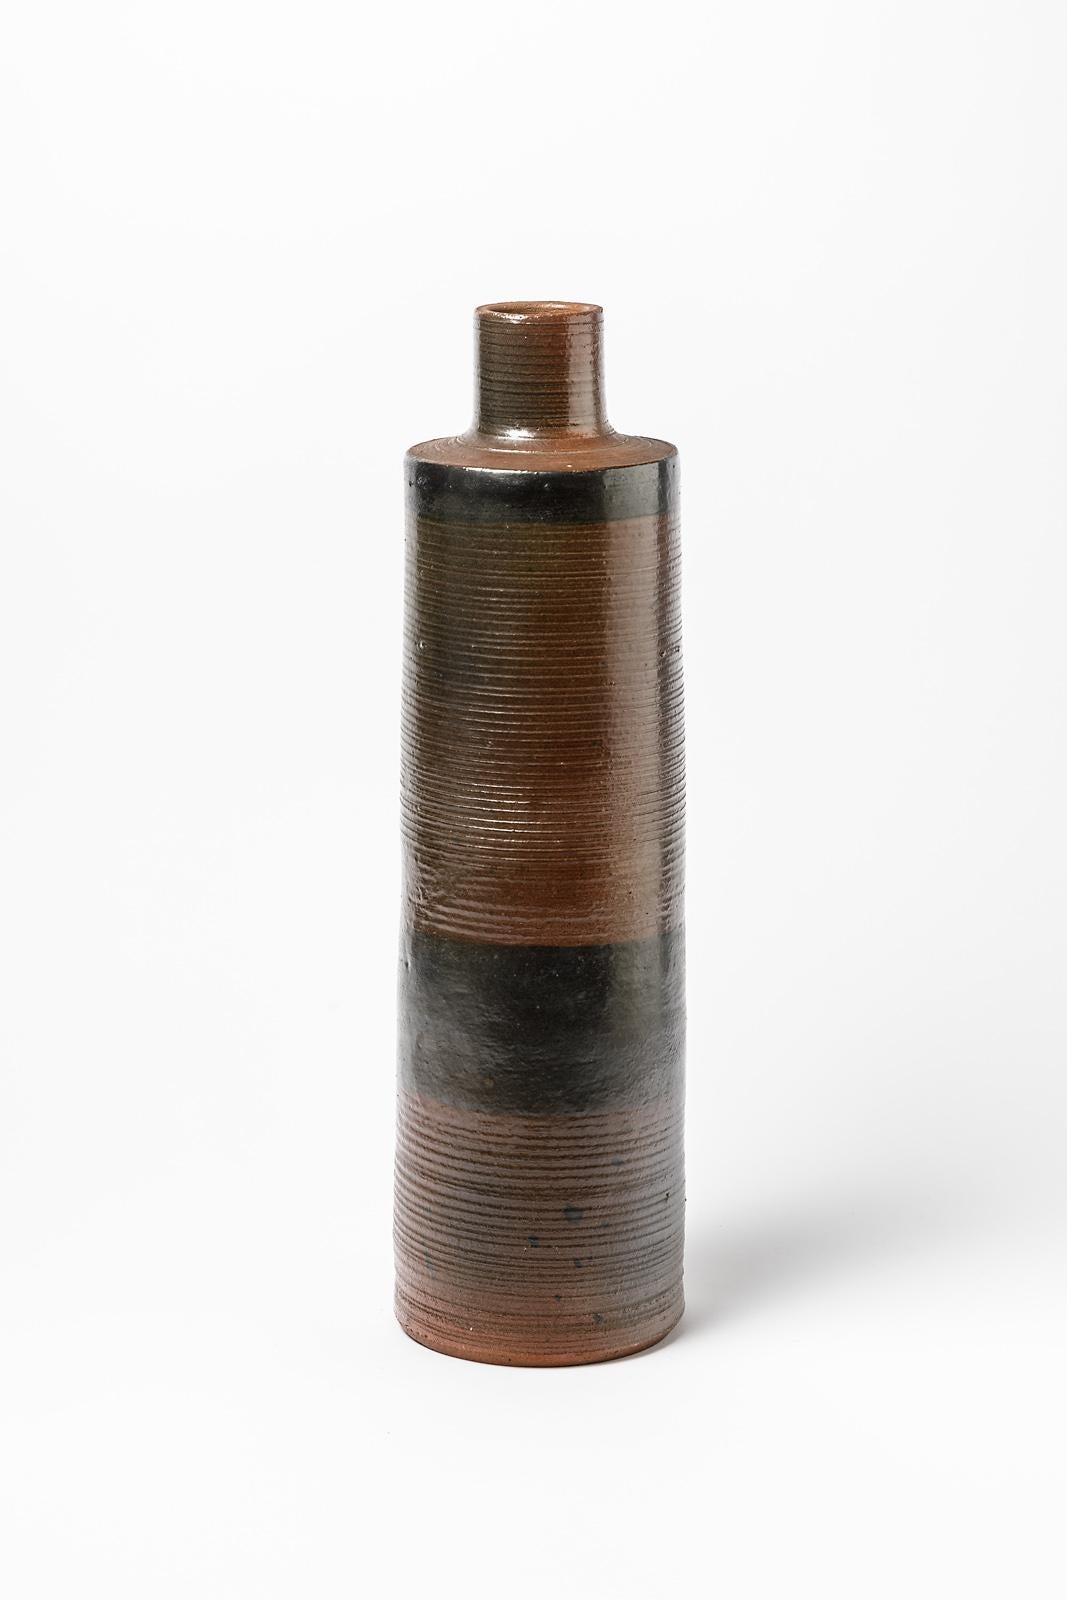 Nicole Giroud

Large and Elegant black and brown stoneware ceramic vase

XXth mid century design

Original perfect conditions

Signed under the base, circa 1970

Measures: Height: 47cm large: 13cm

Price is only for the big vase on the